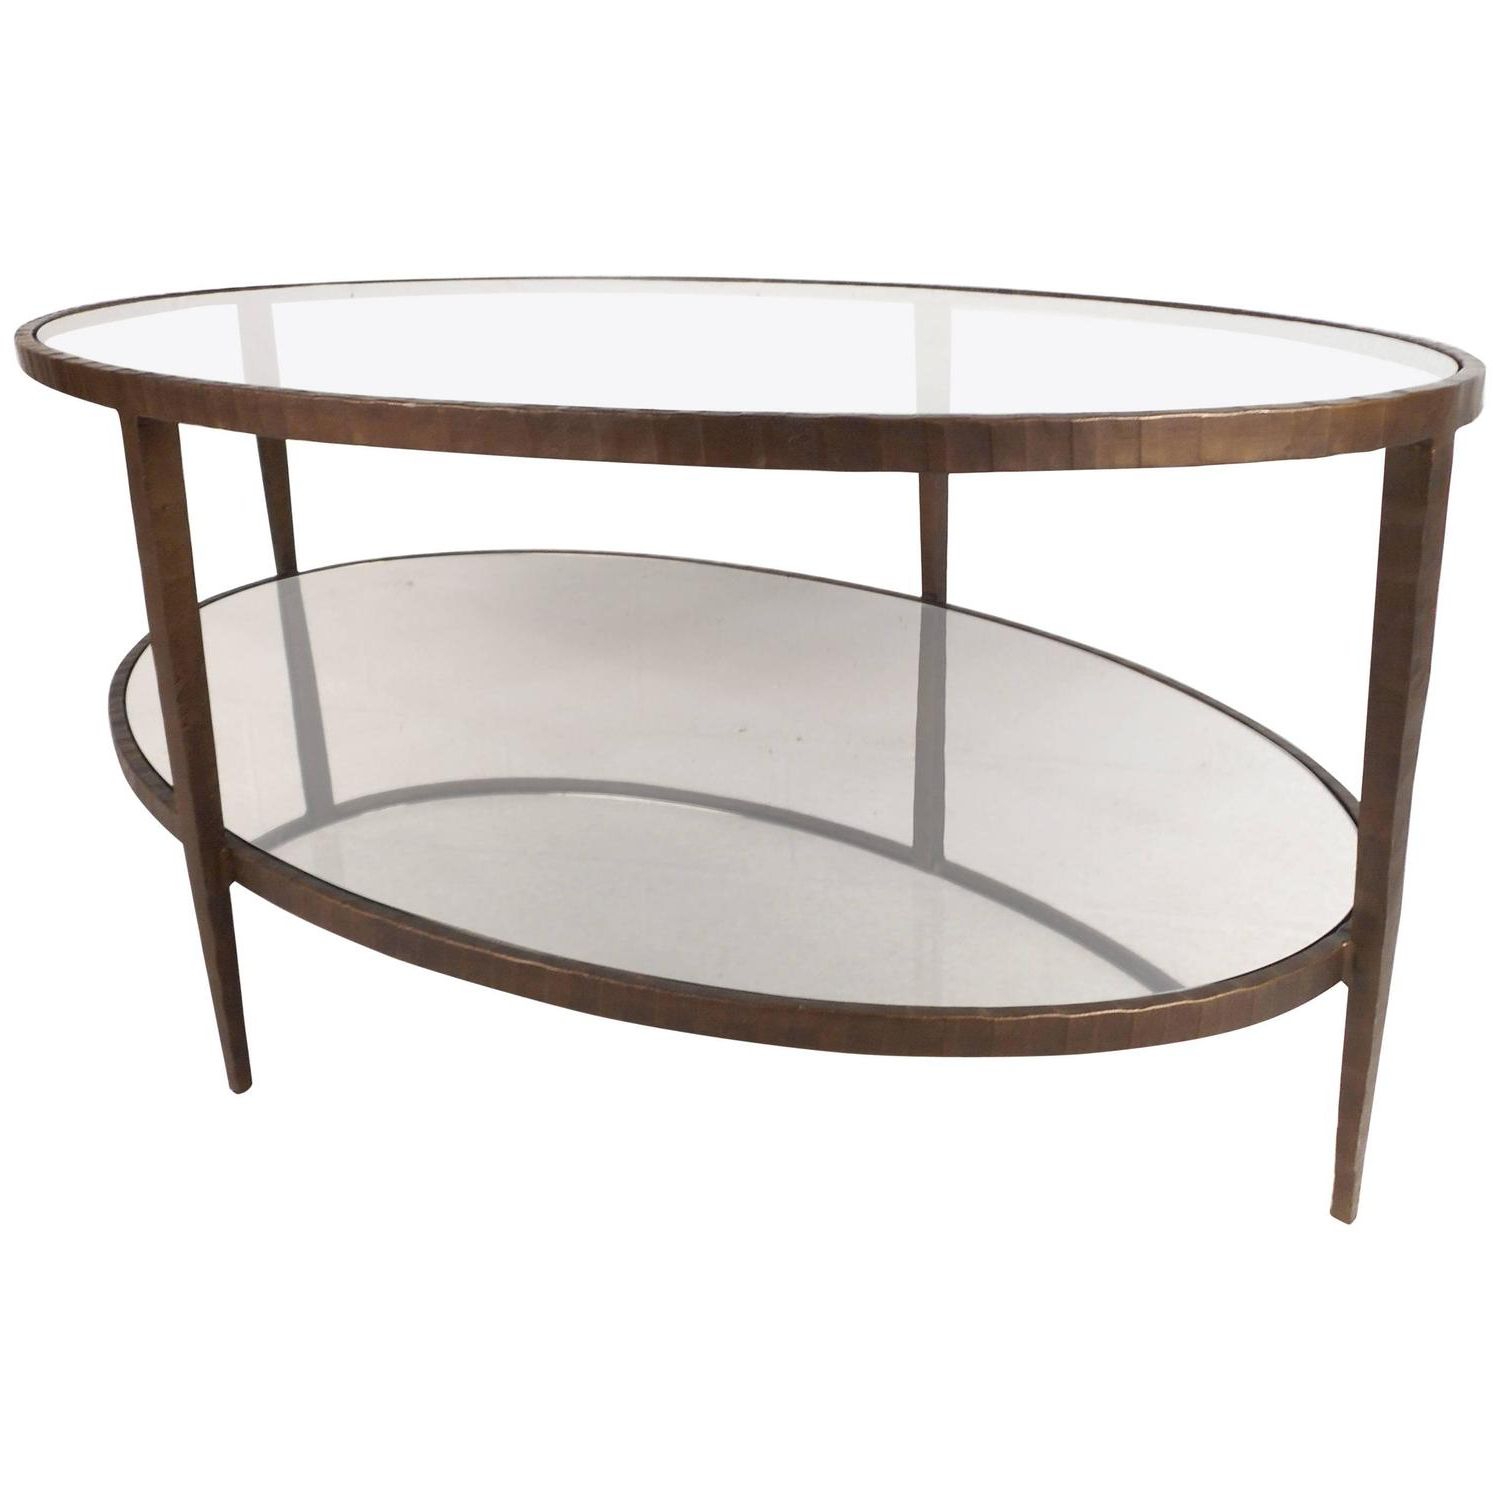 Well Liked Metallic Gold Modern Cocktail Tables In Mid Century Modern Oval Two Tier Textured Metal Coffee (Gallery 12 of 20)